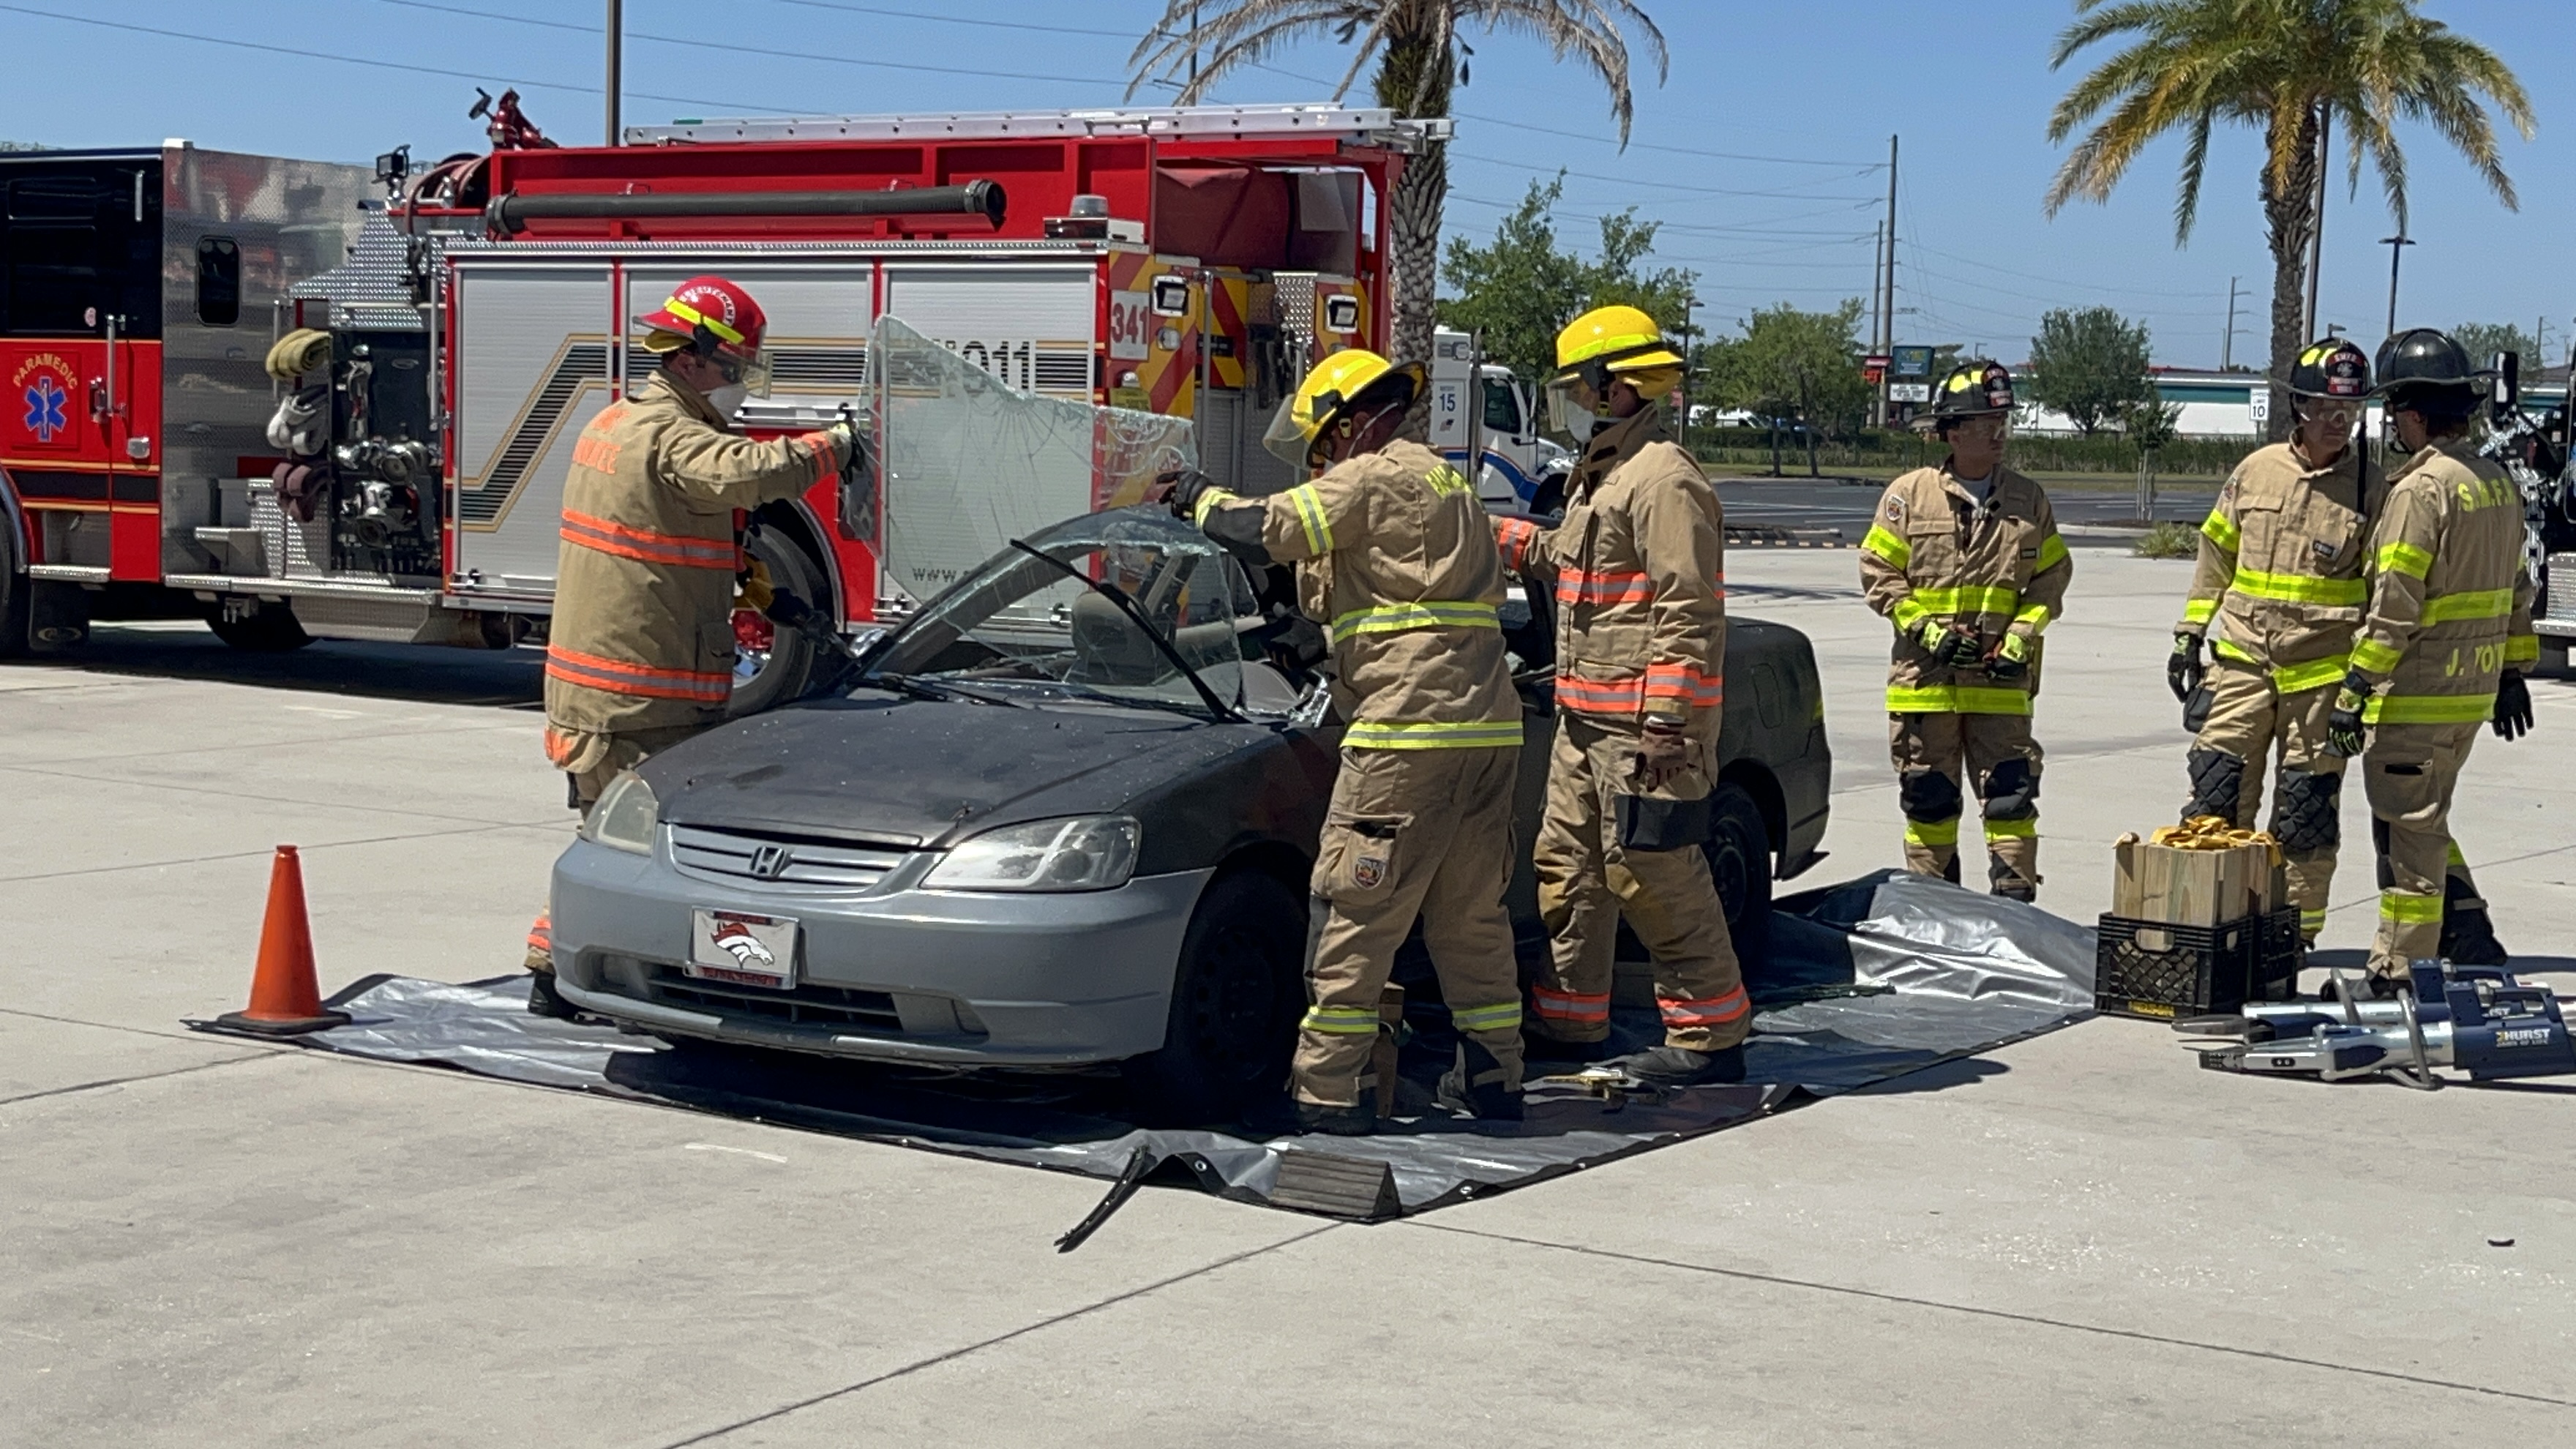 Firefighters remove windshield from car as part of entrapped victim demonstration.